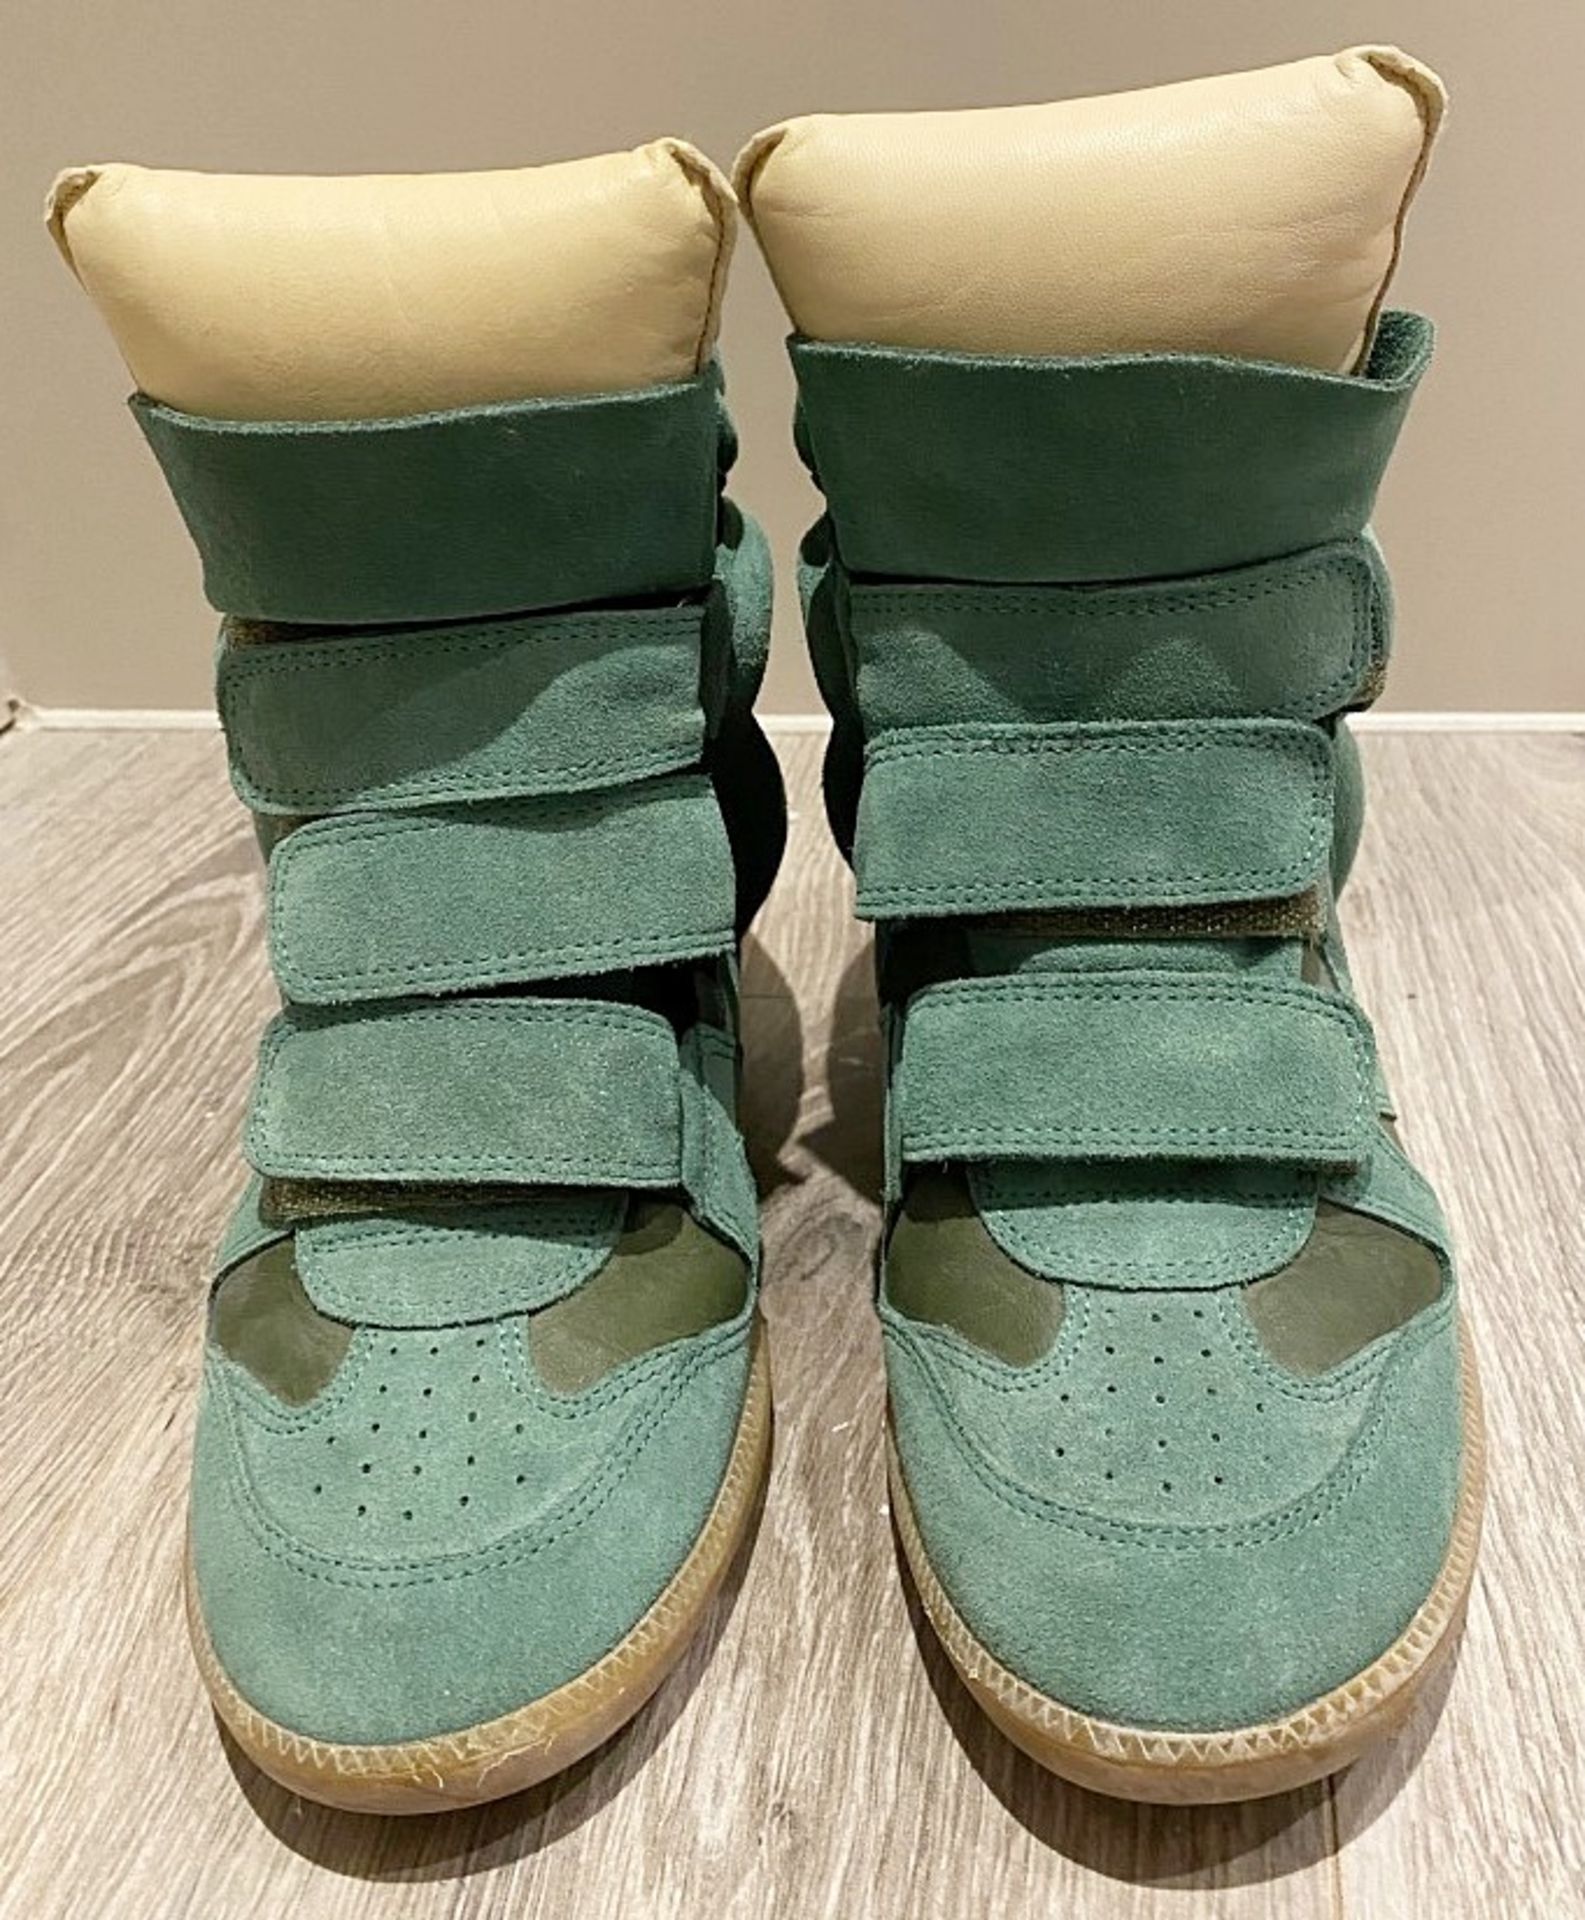 1 x Pair Of Genuine Isabel Marant Boots In Green - Size: 36 - Preowned in Good Condition - Ref: LOT3 - Image 4 of 4